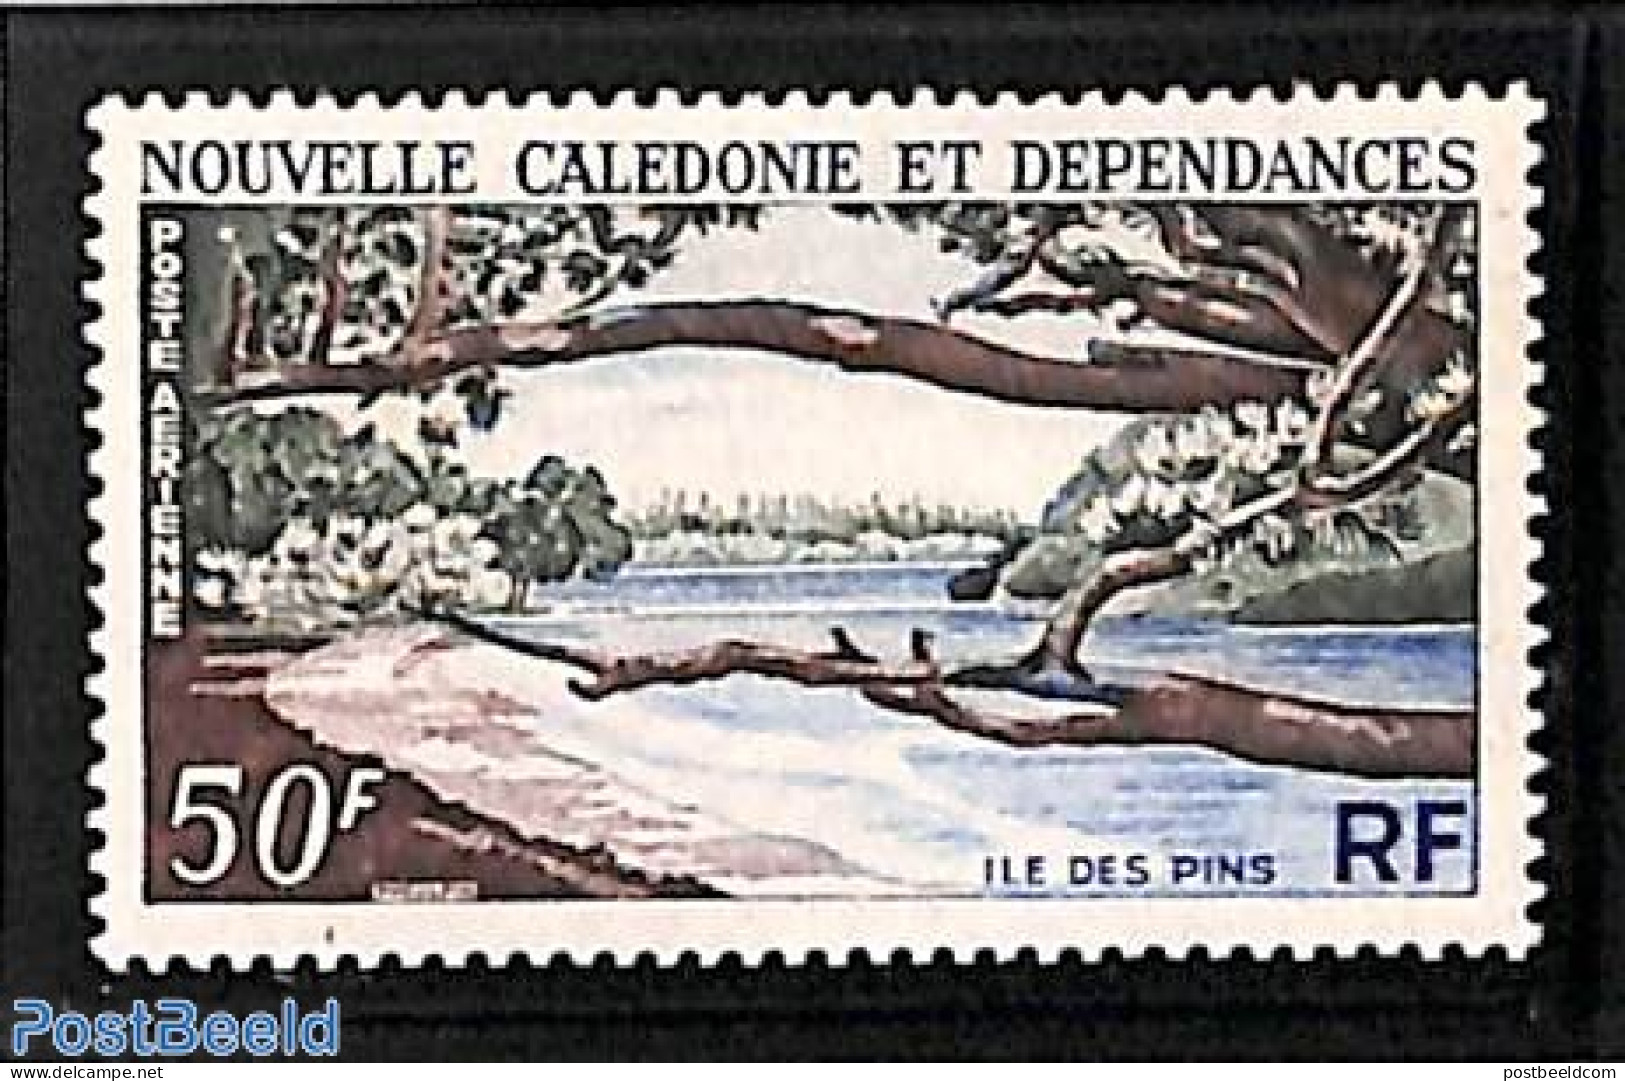 New Caledonia 1964 Pine Island 1v, Mint NH, Nature - Trees & Forests - Nuovi